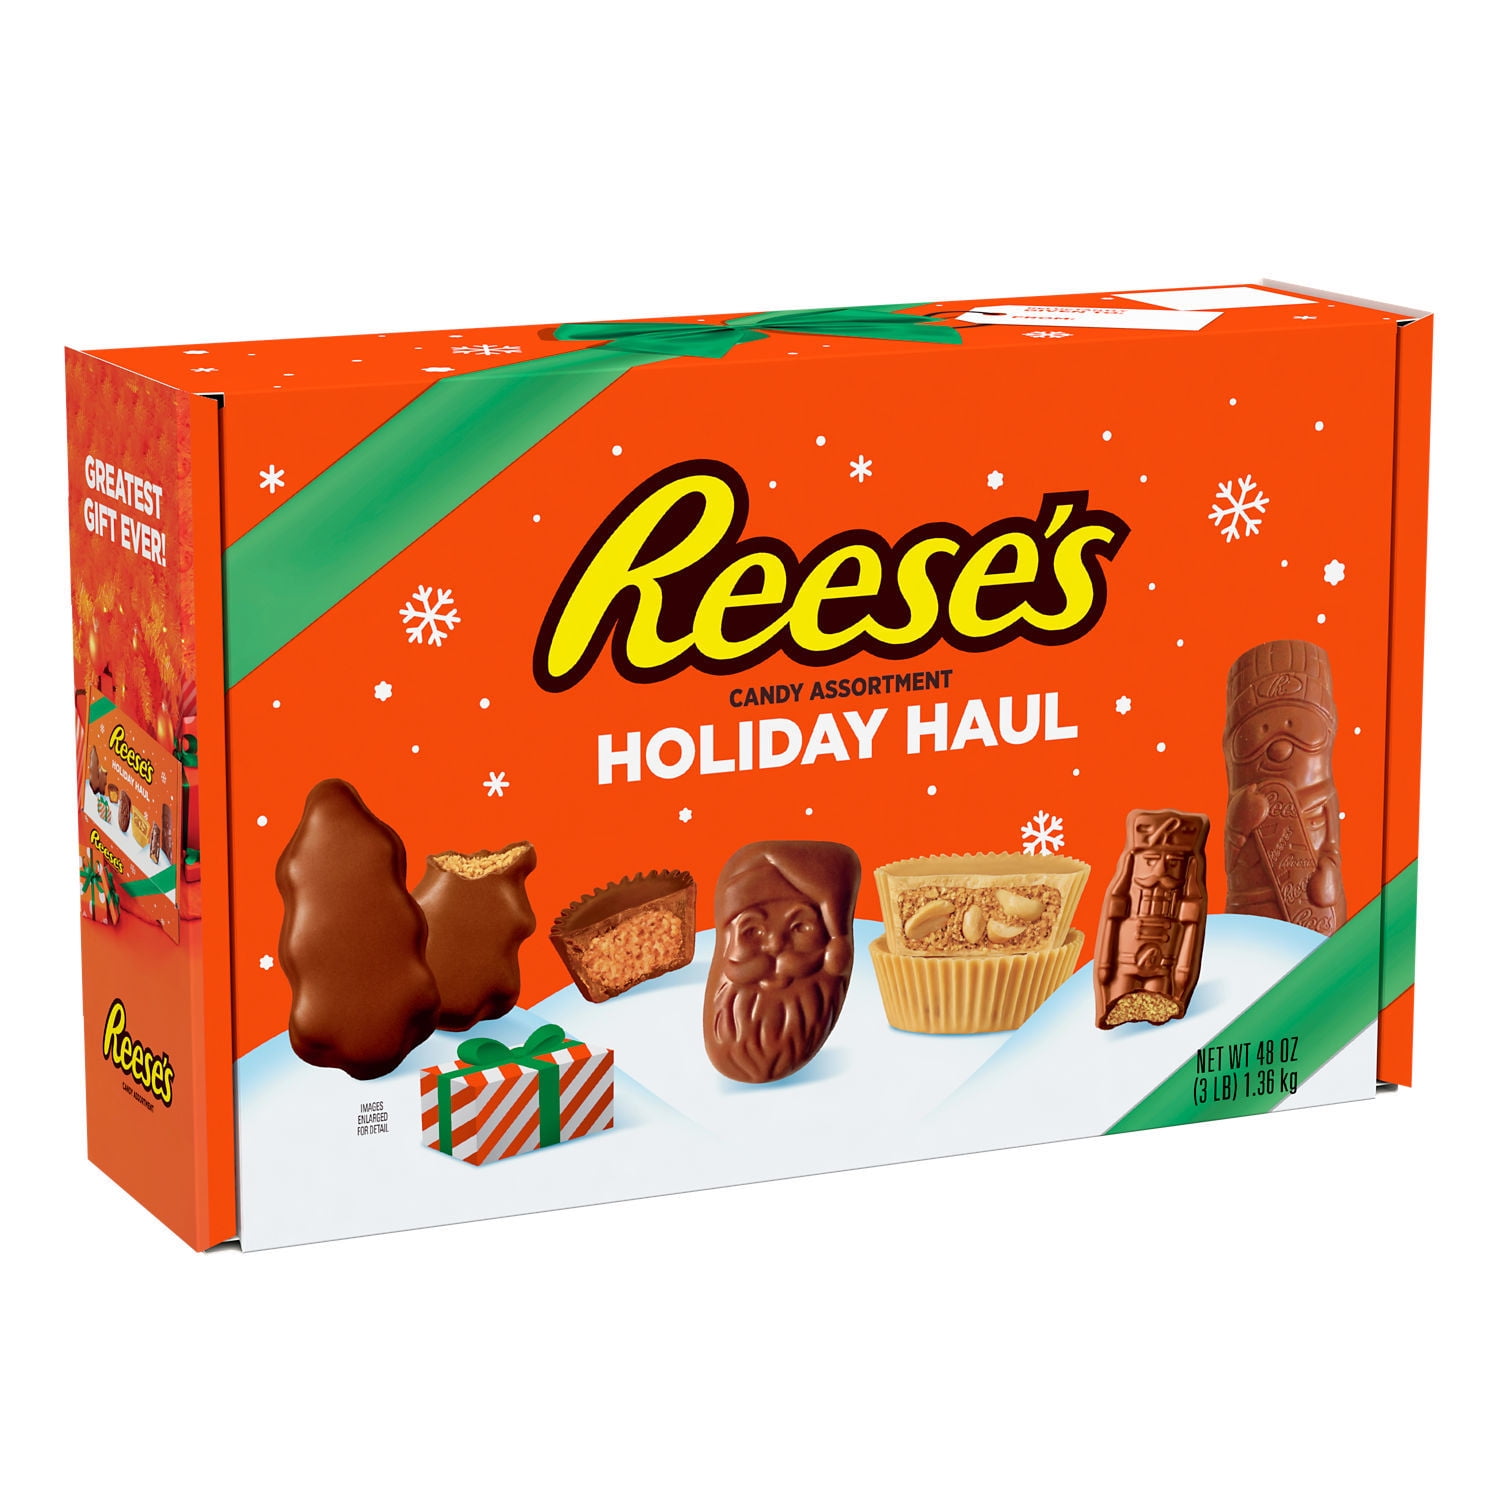 20 Best Christmas Candy to Buy in 2022 - New Christmas Candy